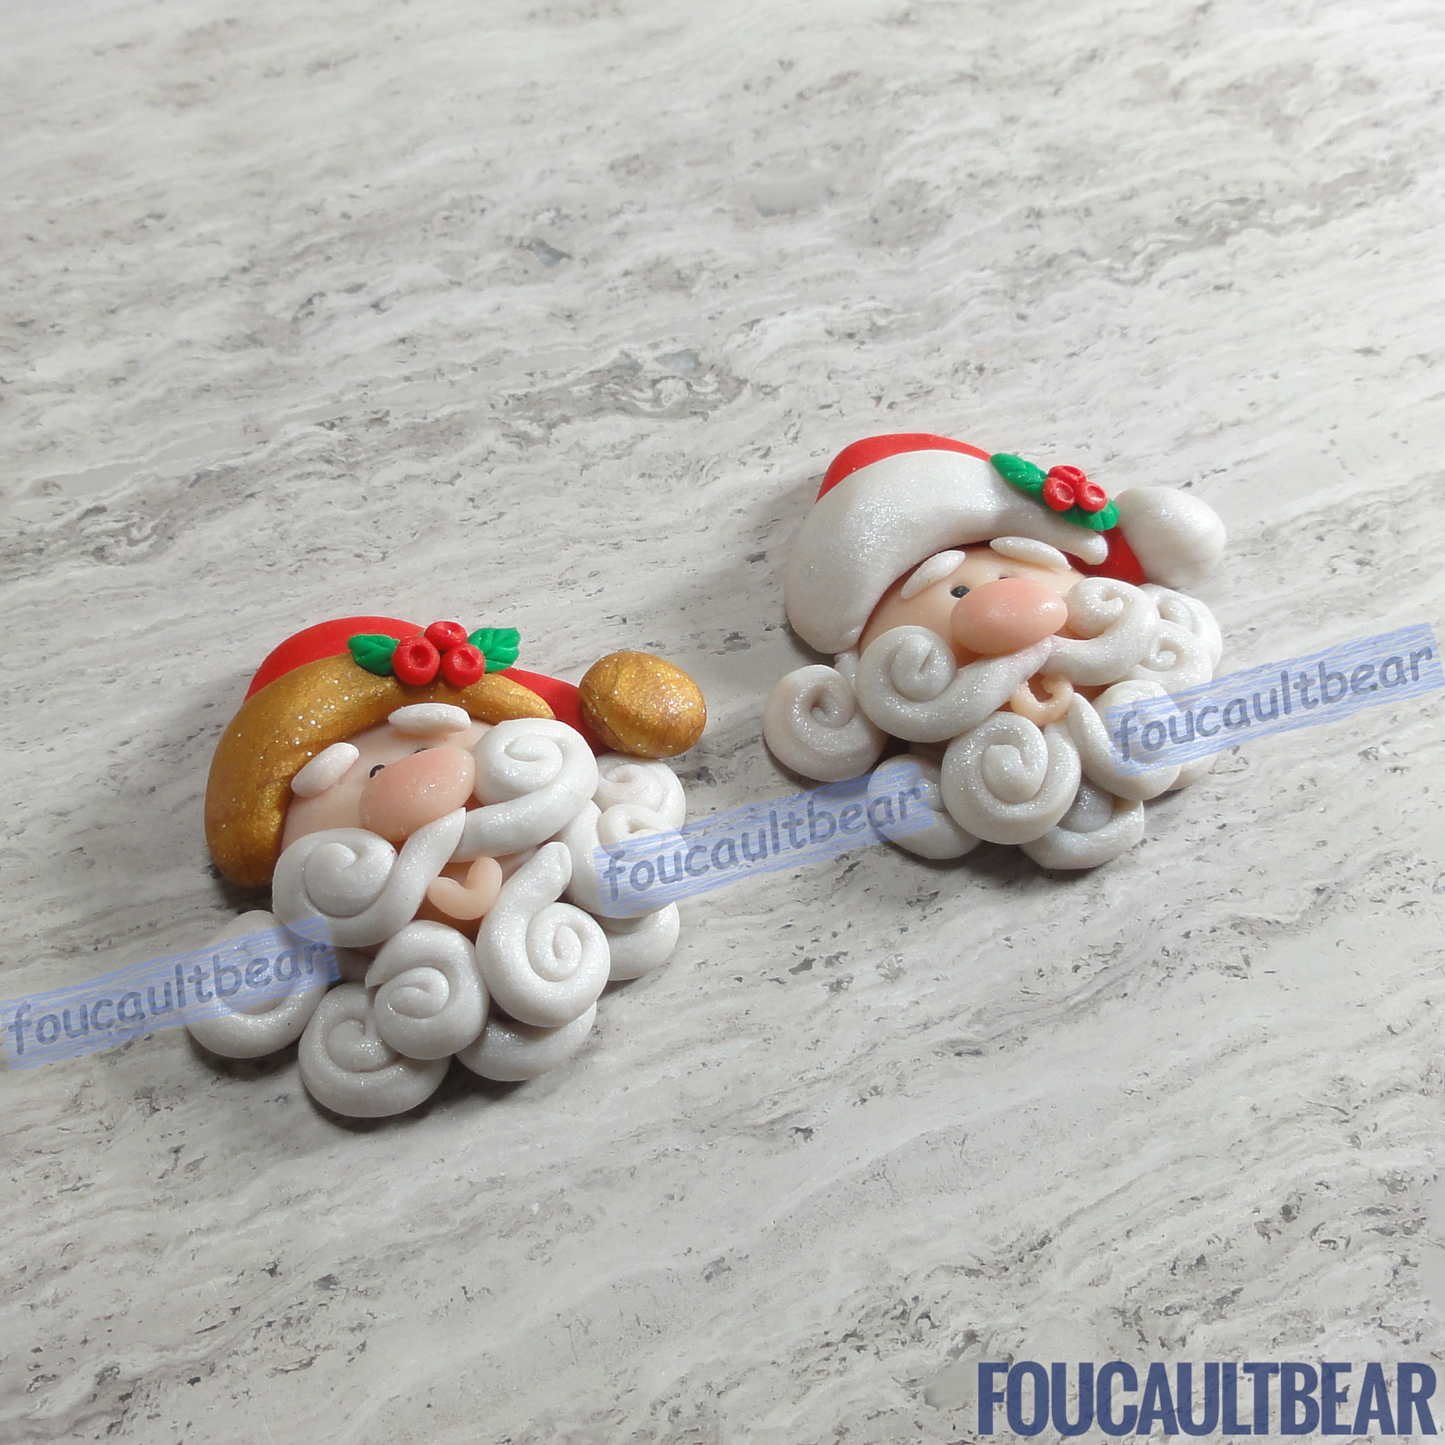 Foucaultbear's HANDMADE CLAY ART FLATBACKS. Jolly Santa Claus, Gold or White Trim. Handmade Polymer Clay Art. This clay flatback Jolly Santa Claus, in Gold or White Trim makes for a perfect hair centerpiece. You have the option of choosing either Gold Trim or White Trim. Notice the little Mistletoe! 